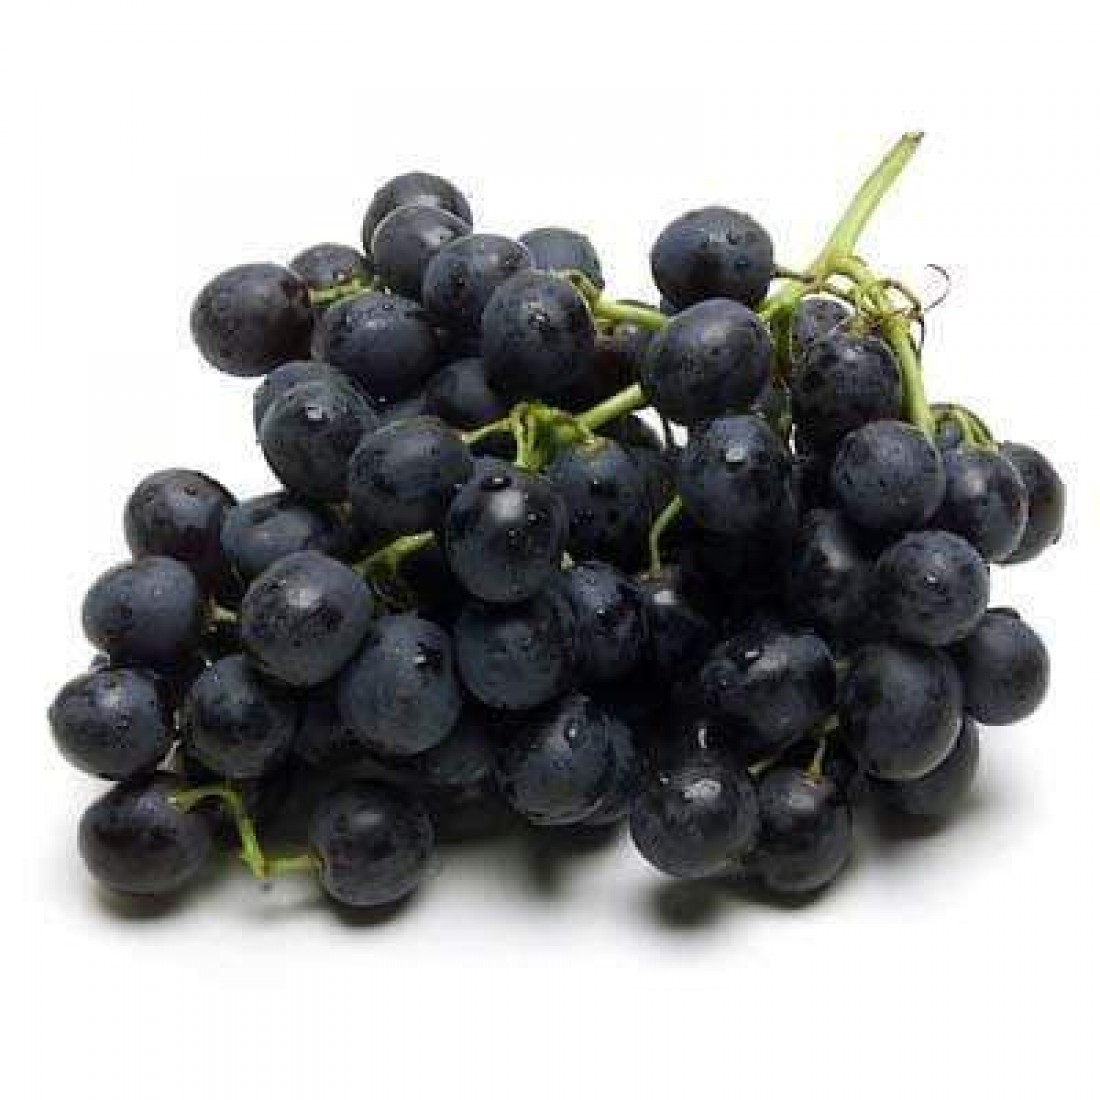 AUS/South African Black Seedless Grapes